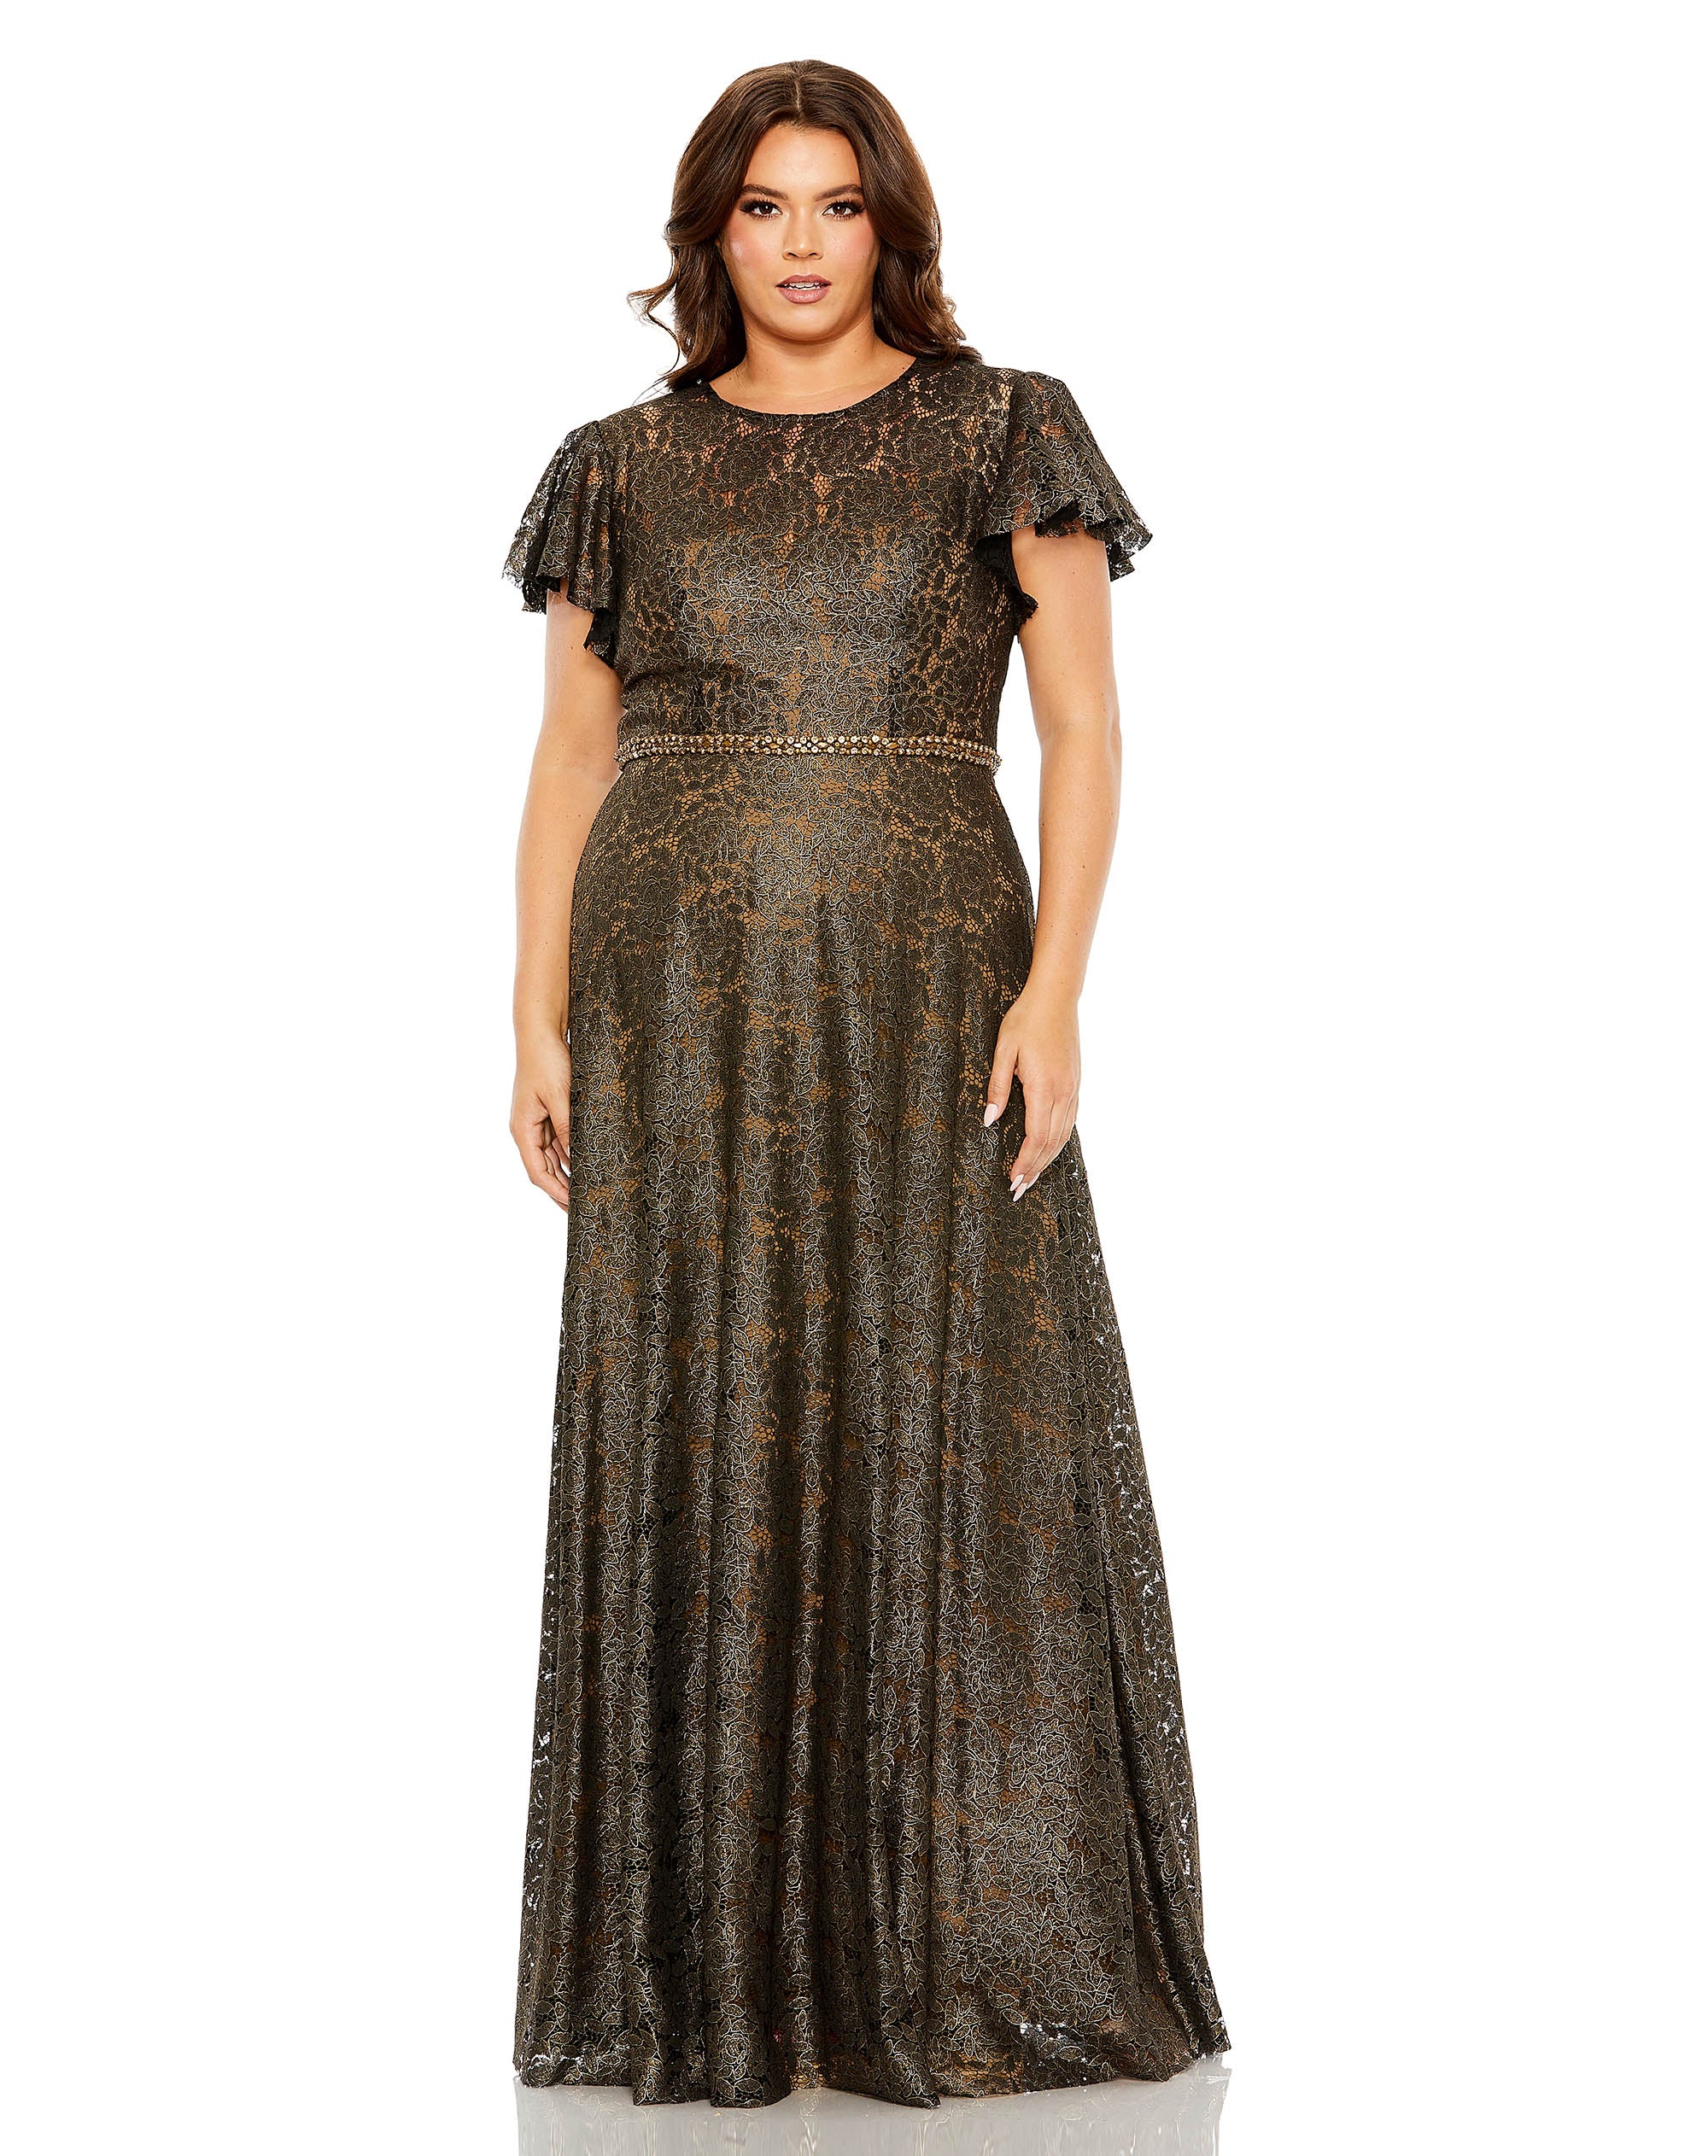 Lace Butterfly Sleeve Beaded Belt Gown